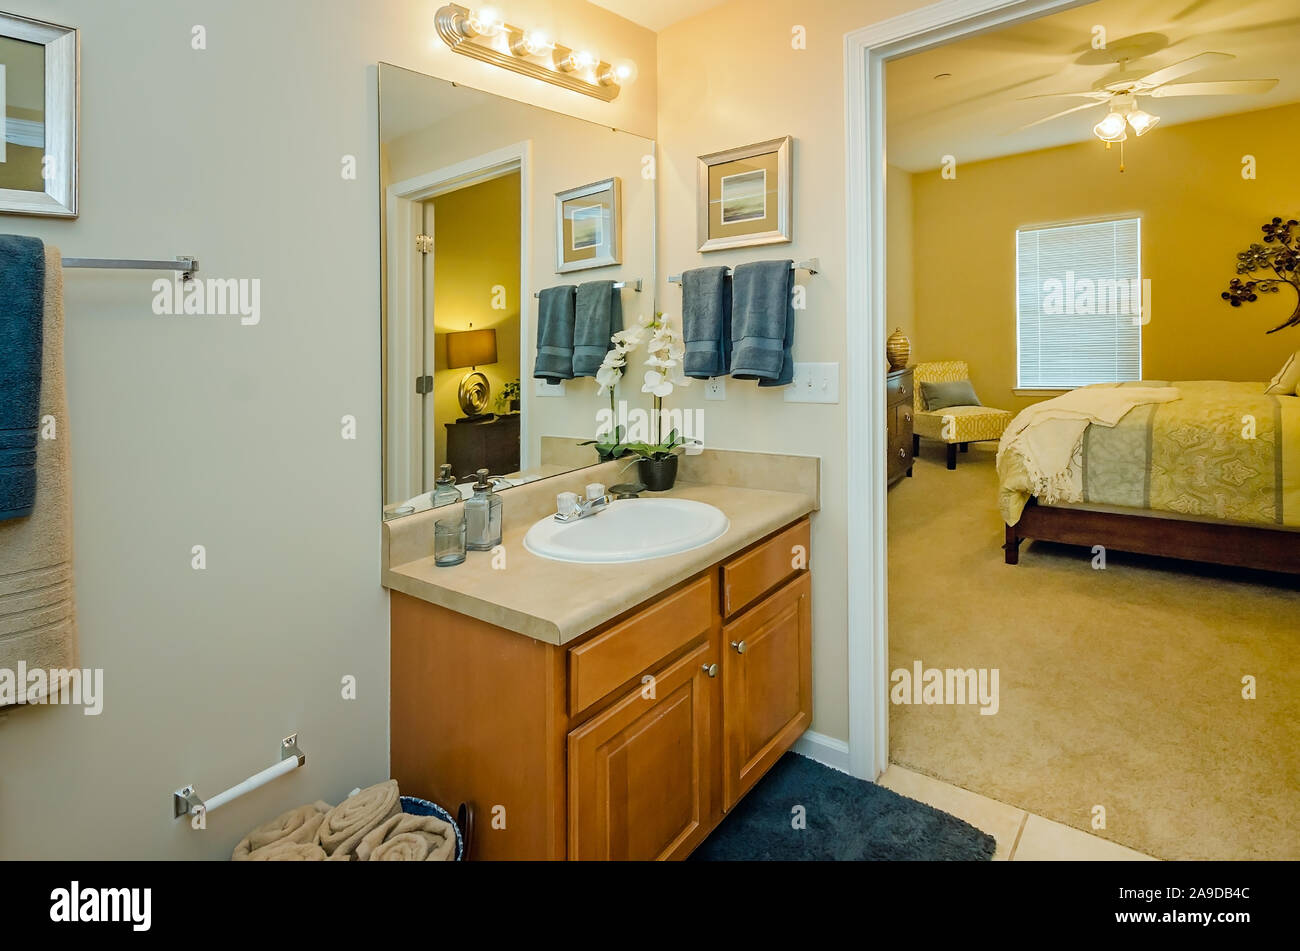 The Master Bathroom And Master Bedroom Is Pictured At